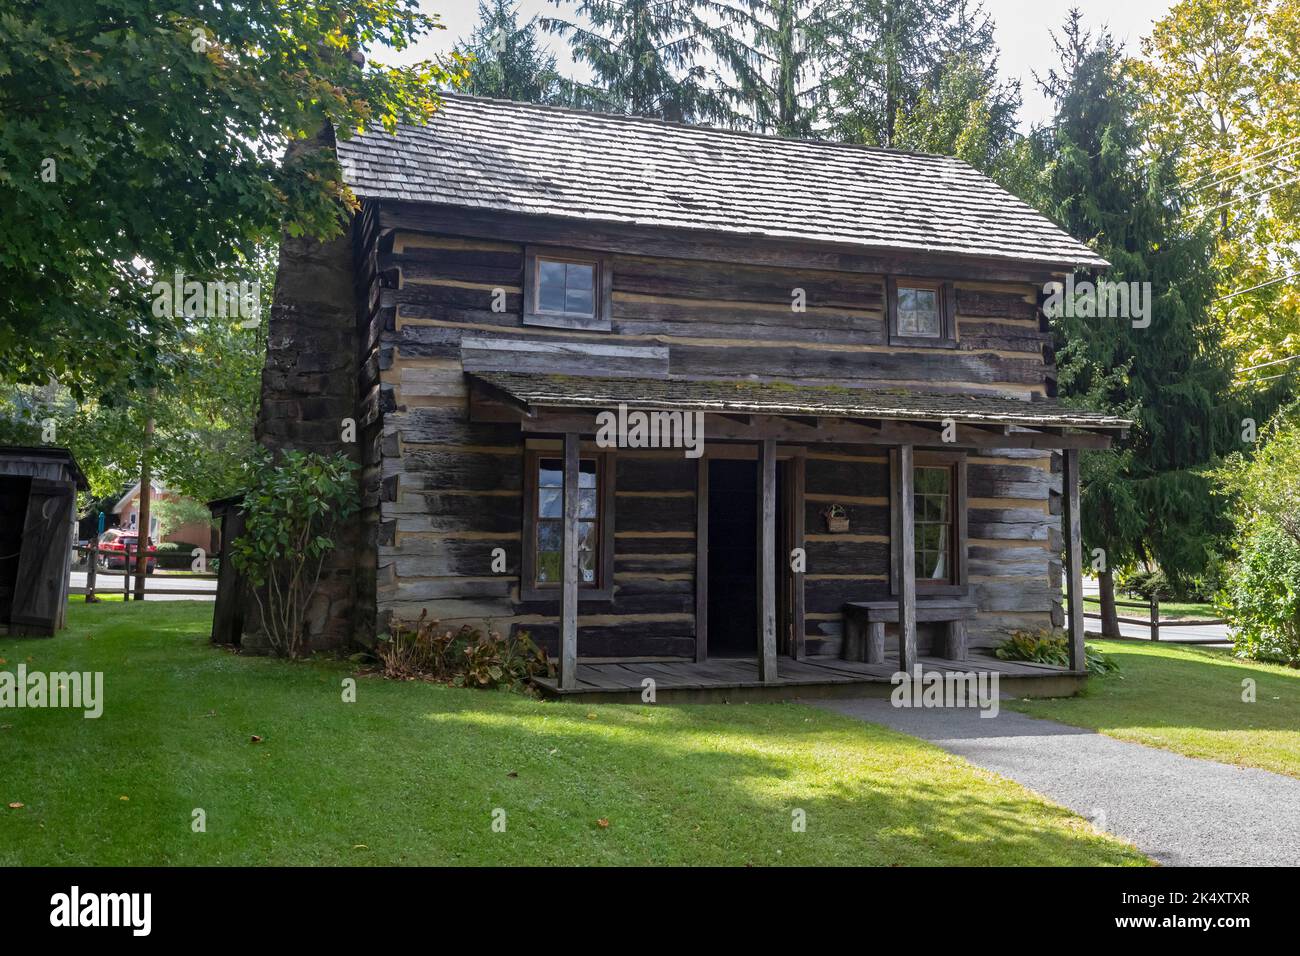 Beckley, West Virginia - A two-story log house in the Mountain Homestead, an Appalachian frontier settlement that recreates how mountain settlers live Stock Photo